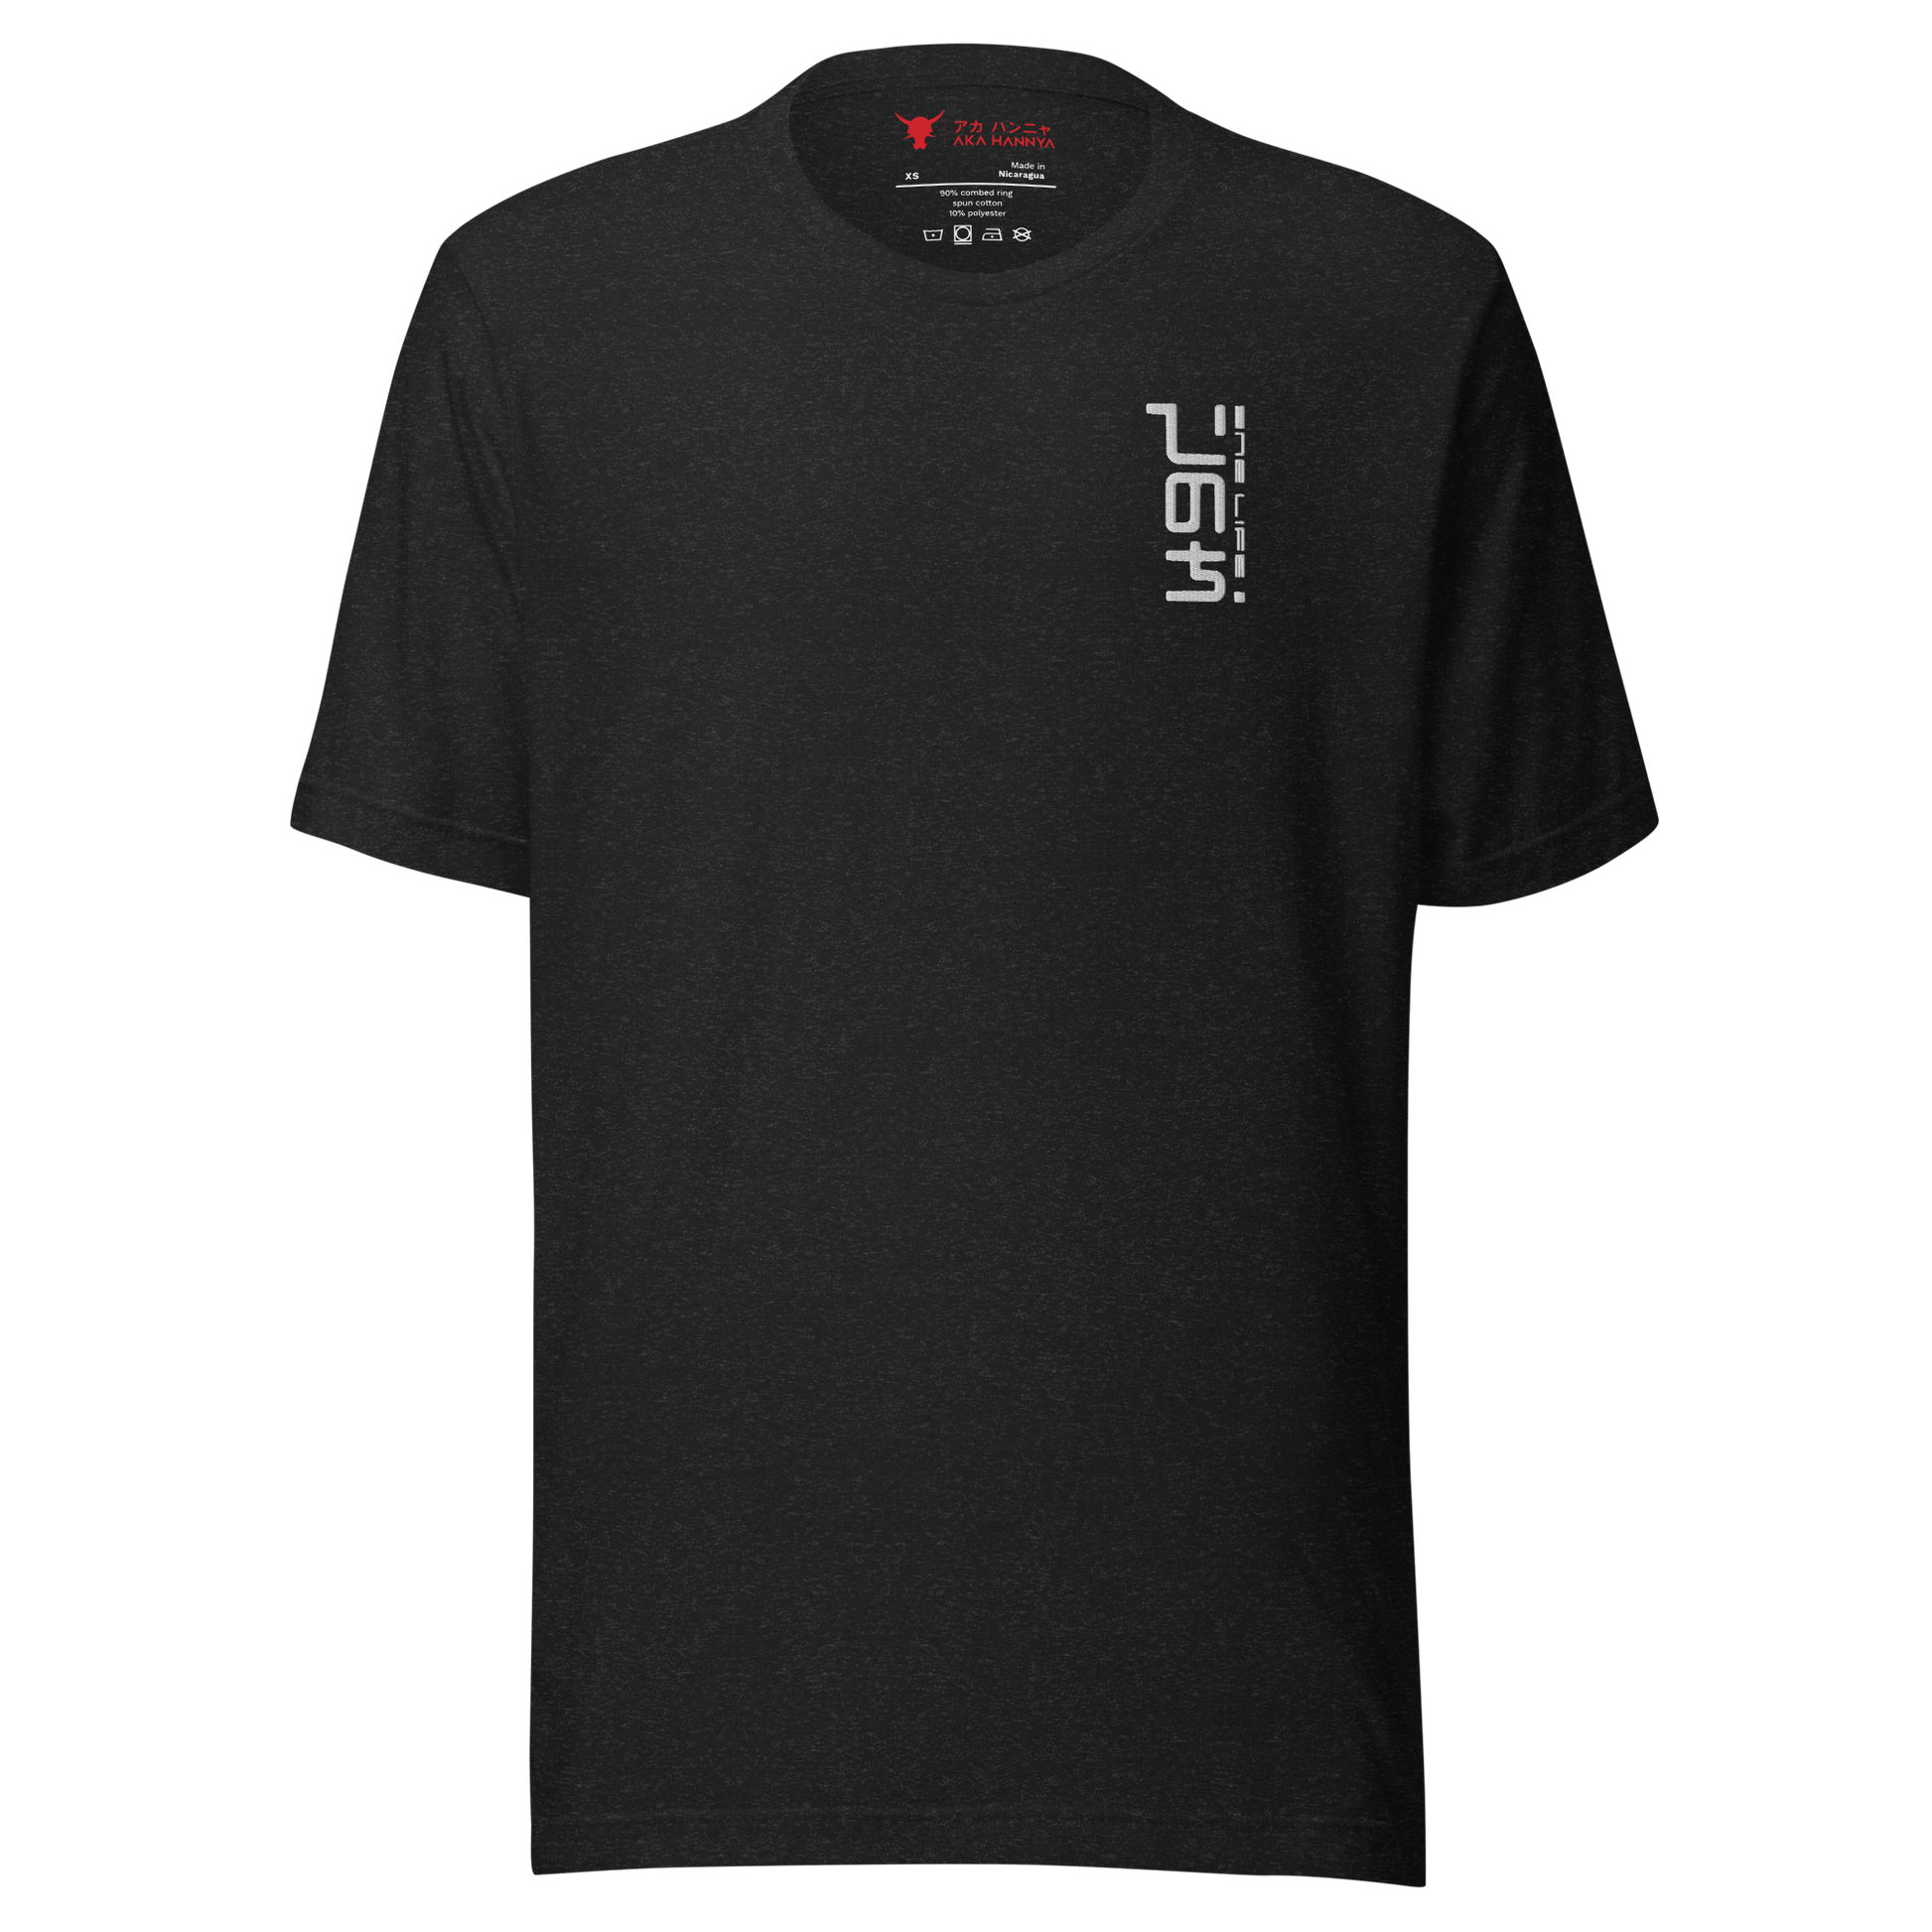 One-Life tee heather black front side on transparent bakground